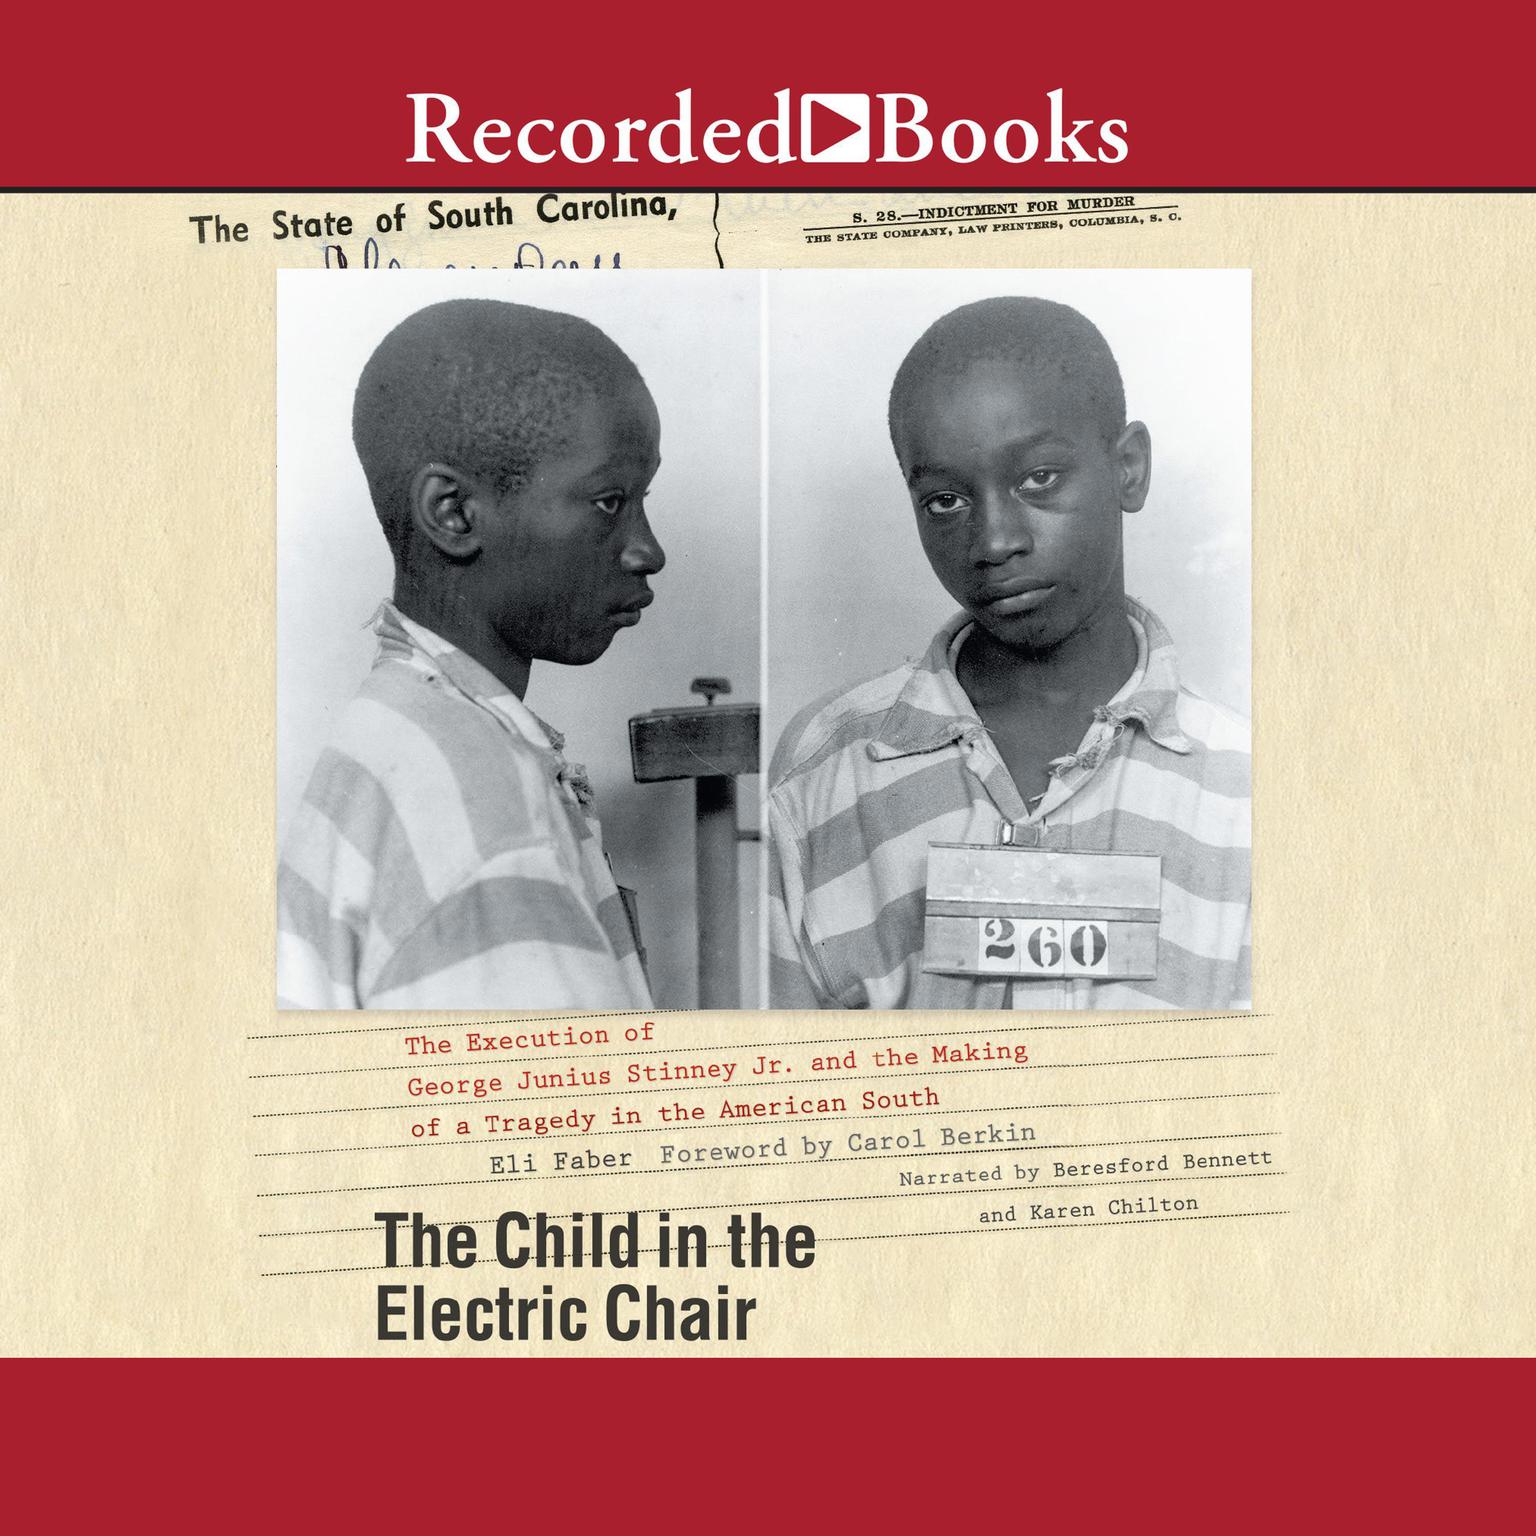 The Child in the Electric Chair: The Execution of George Junius Stinney Jr. and the Making of a Tragedy in the American South Audiobook, by Eli Faber